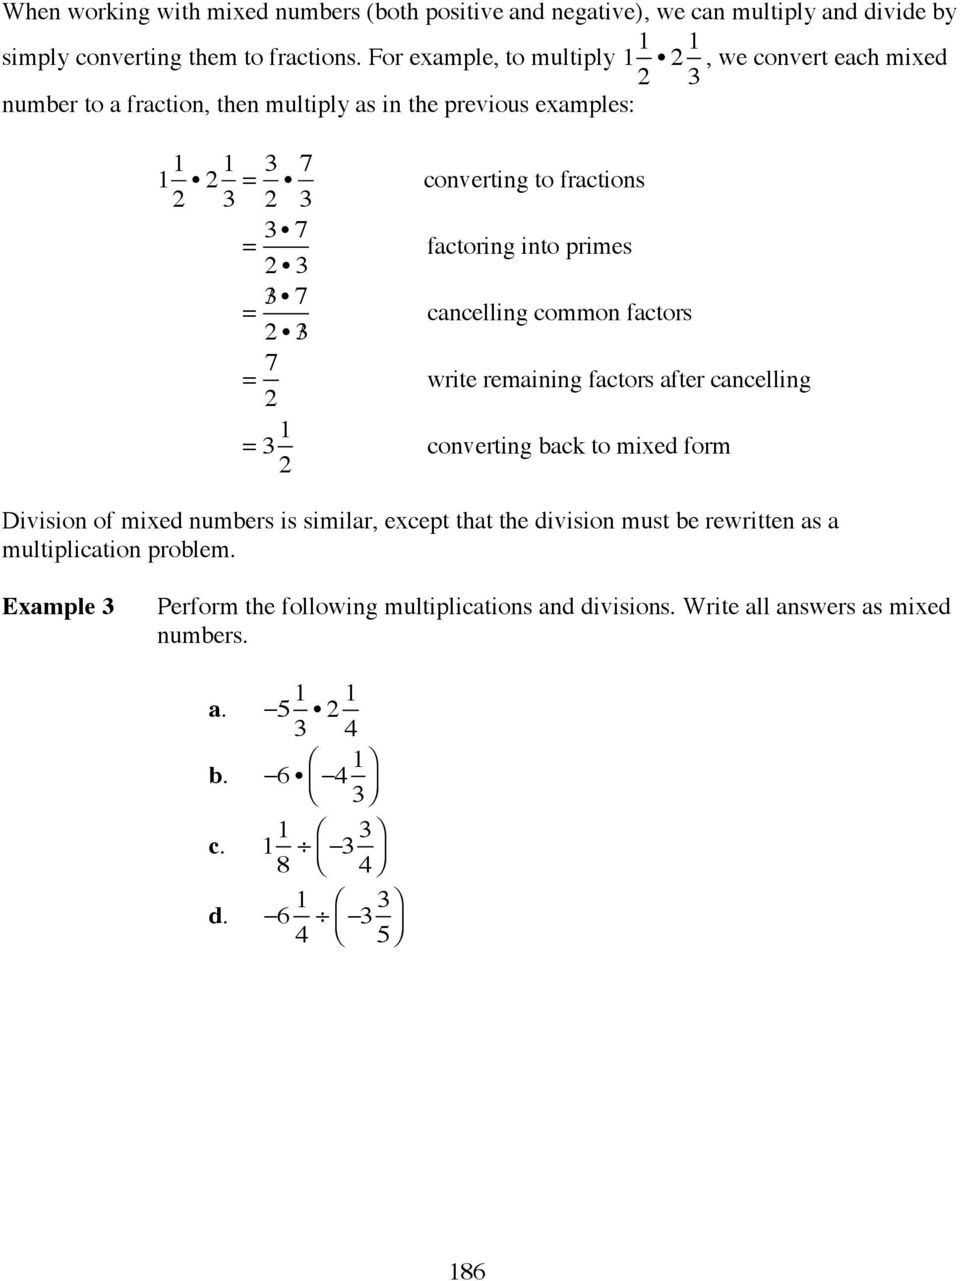 2 3 1 2 converting to fractions cancelling common factors converting back to mixed form Division of mixed numbers is similar, except that the division must be